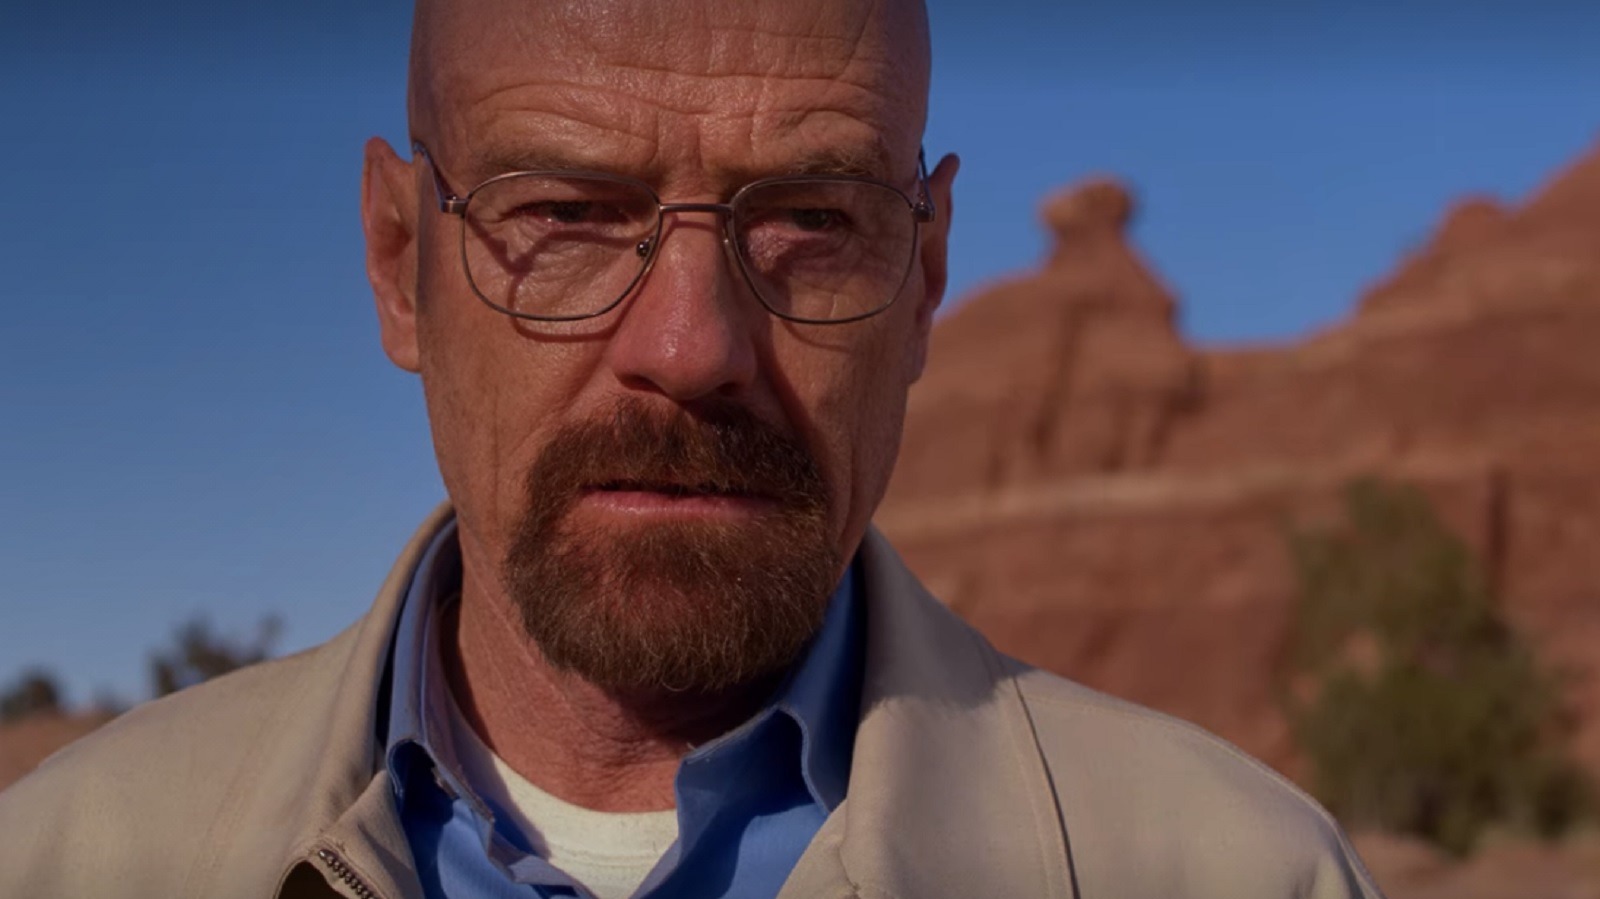 Congressman's page - 7 years ago today 'Ozymandias' was released 🖤  Showcasing the wreckage of the Heisenberg Empire amounts in devastating  fashion, 'Ozymandias' of Breaking Bad has a perfect 10 out of